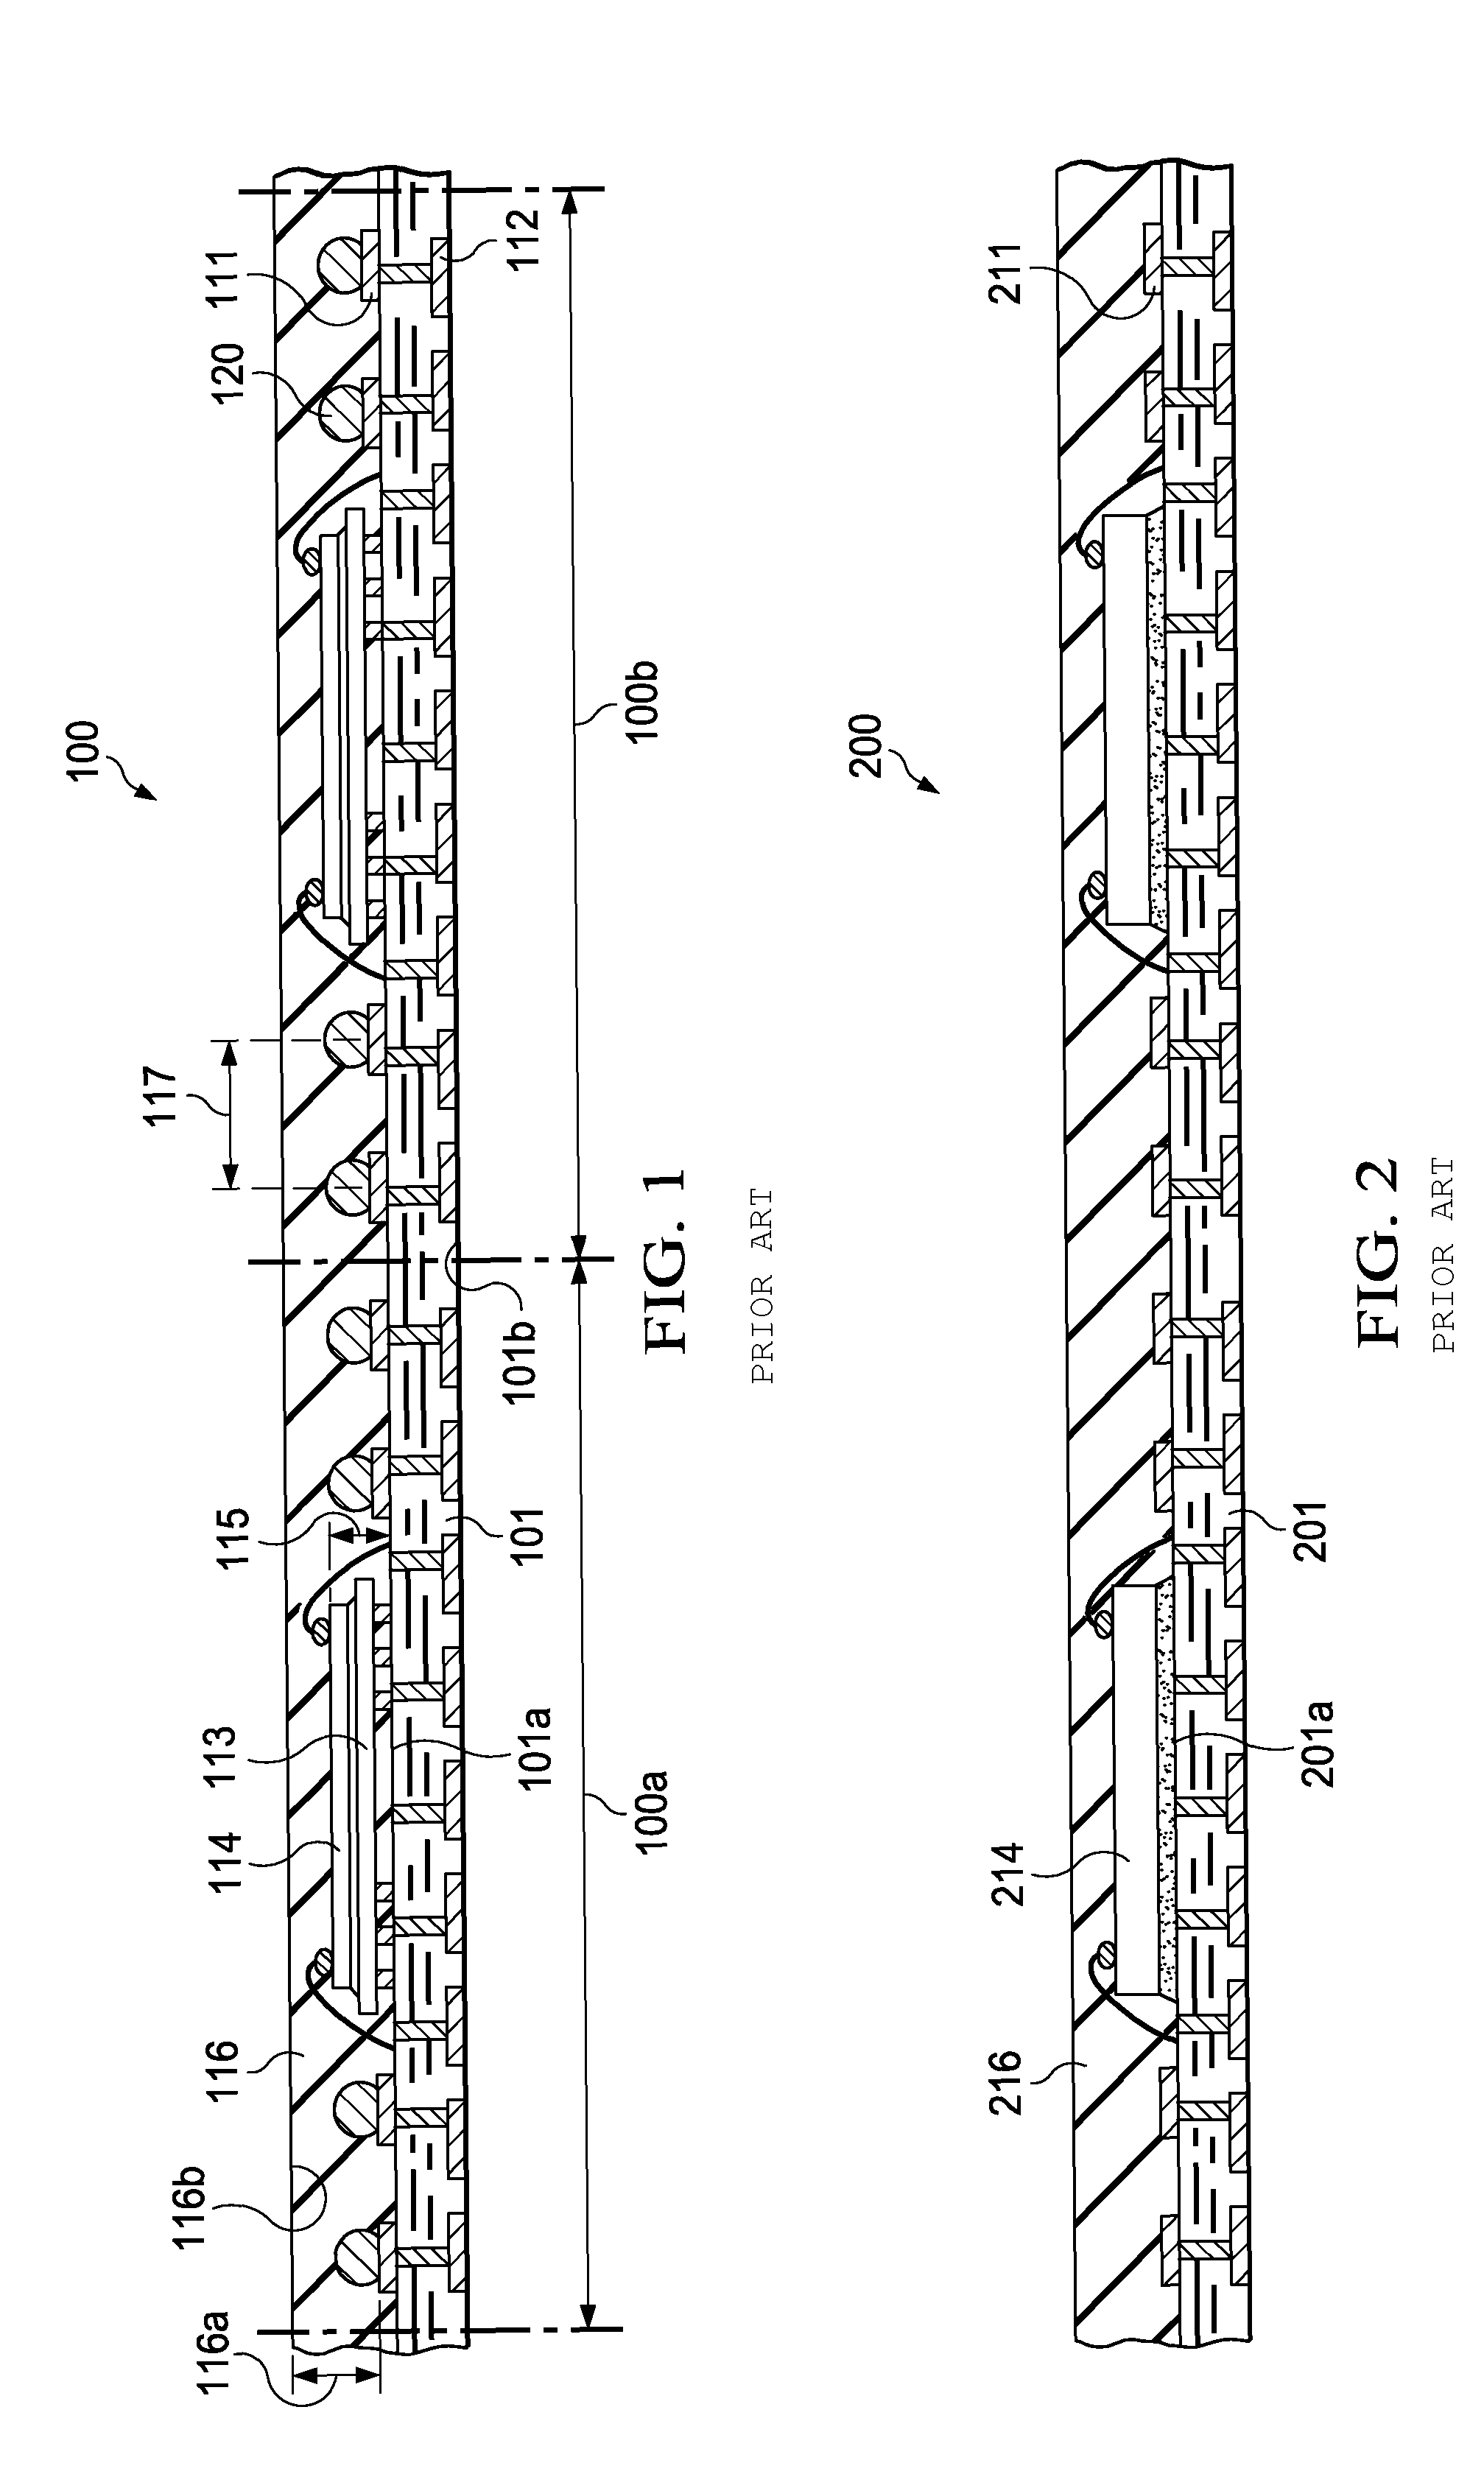 Method for exposing and cleaning insulating coats from metal contact surfaces